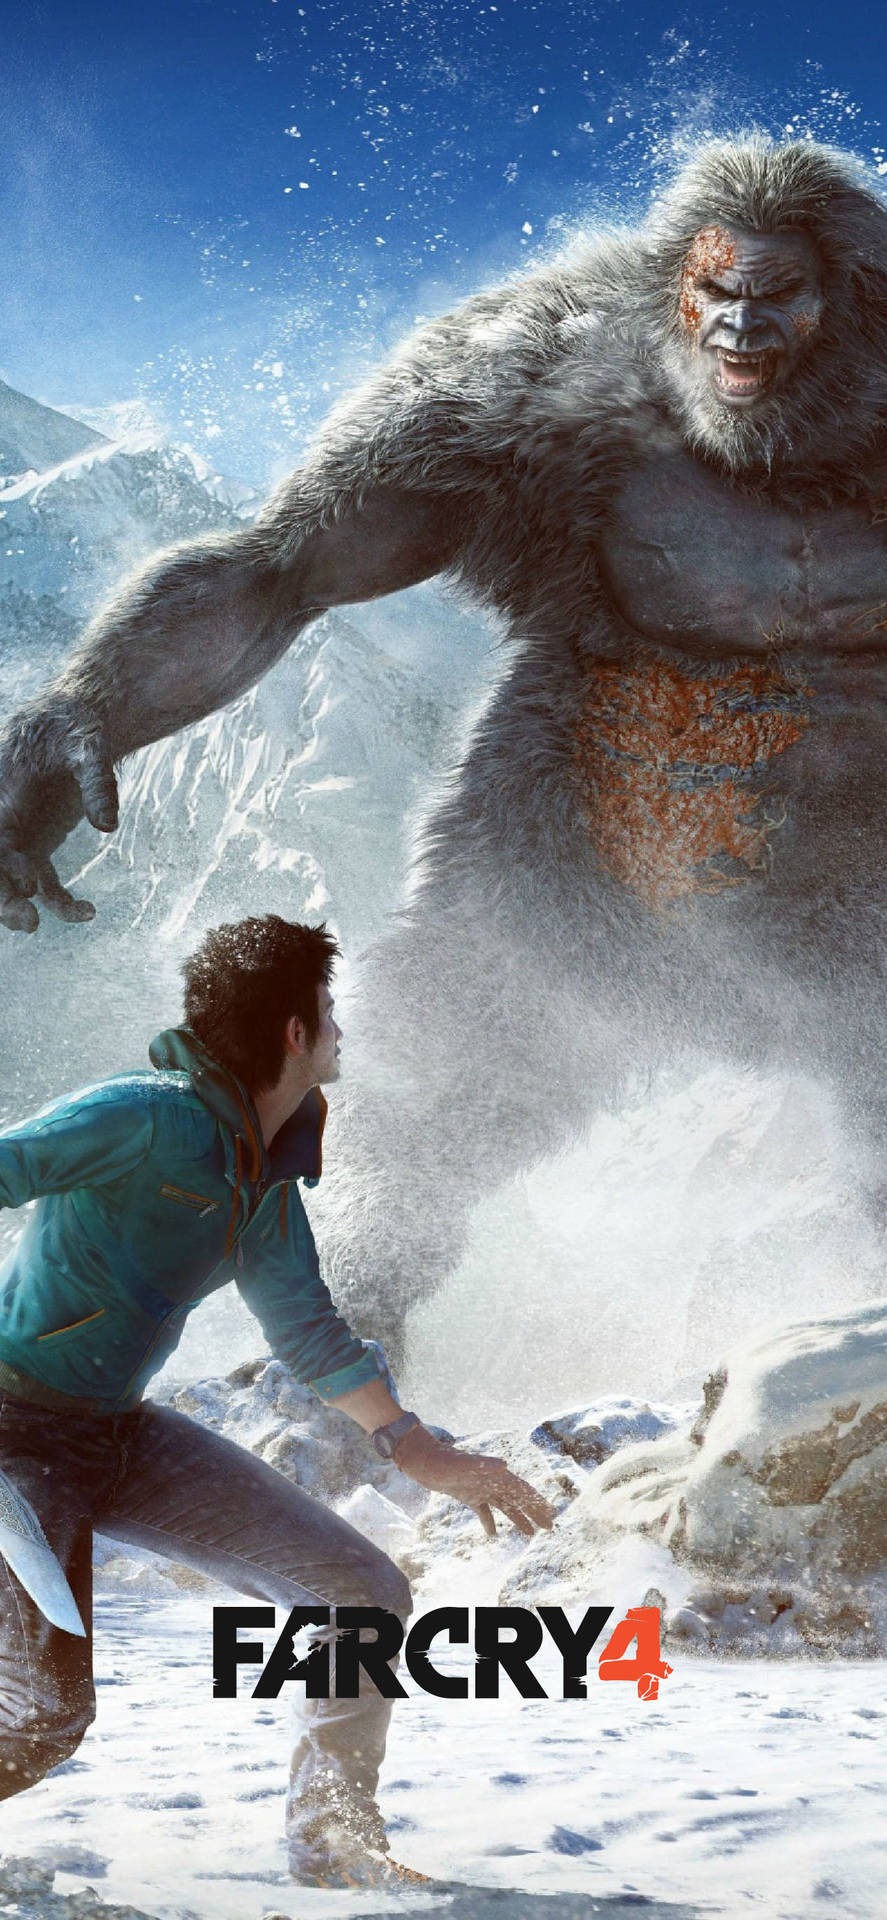 Jasonoch Yeti Far Cry Iphone (note: This Is Actually Already In Swedish, No Changes Needed!) Wallpaper